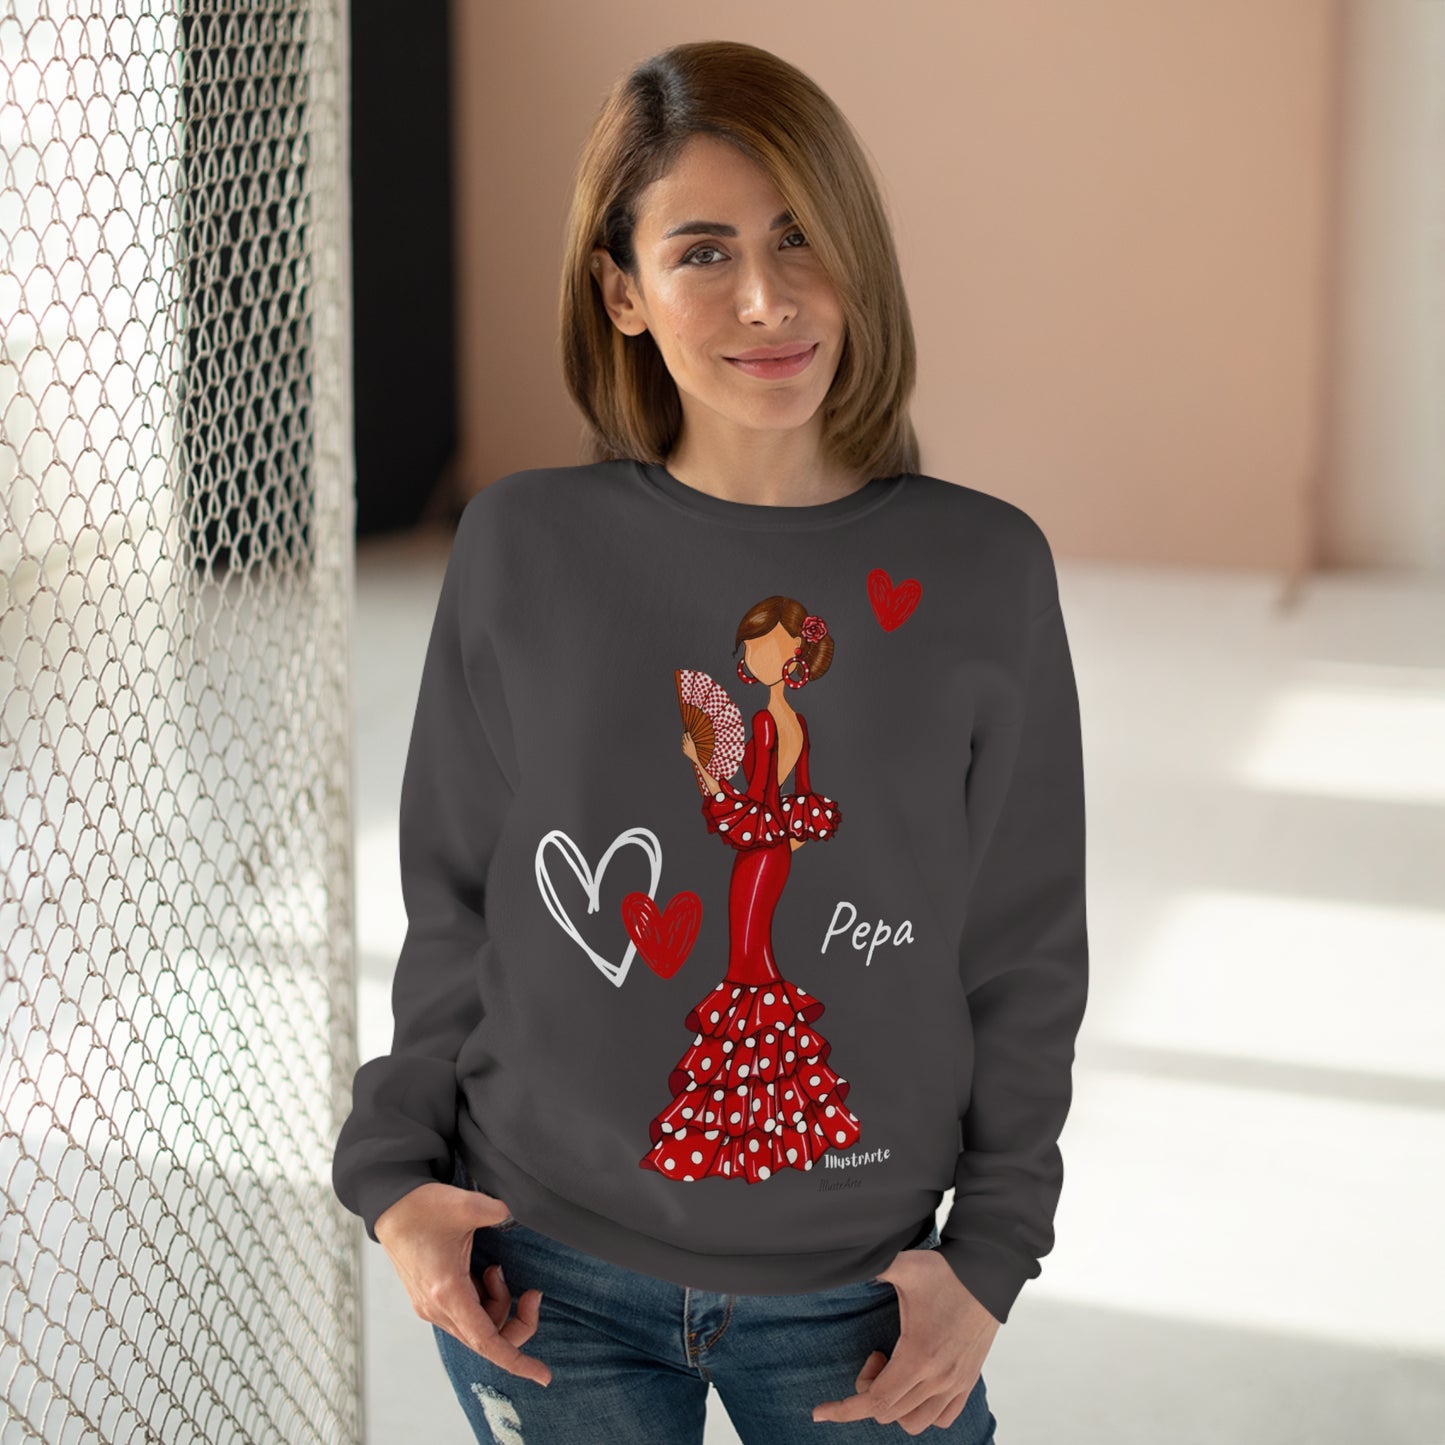 a woman wearing a sweatshirt with a picture of a woman in a polka dot dress